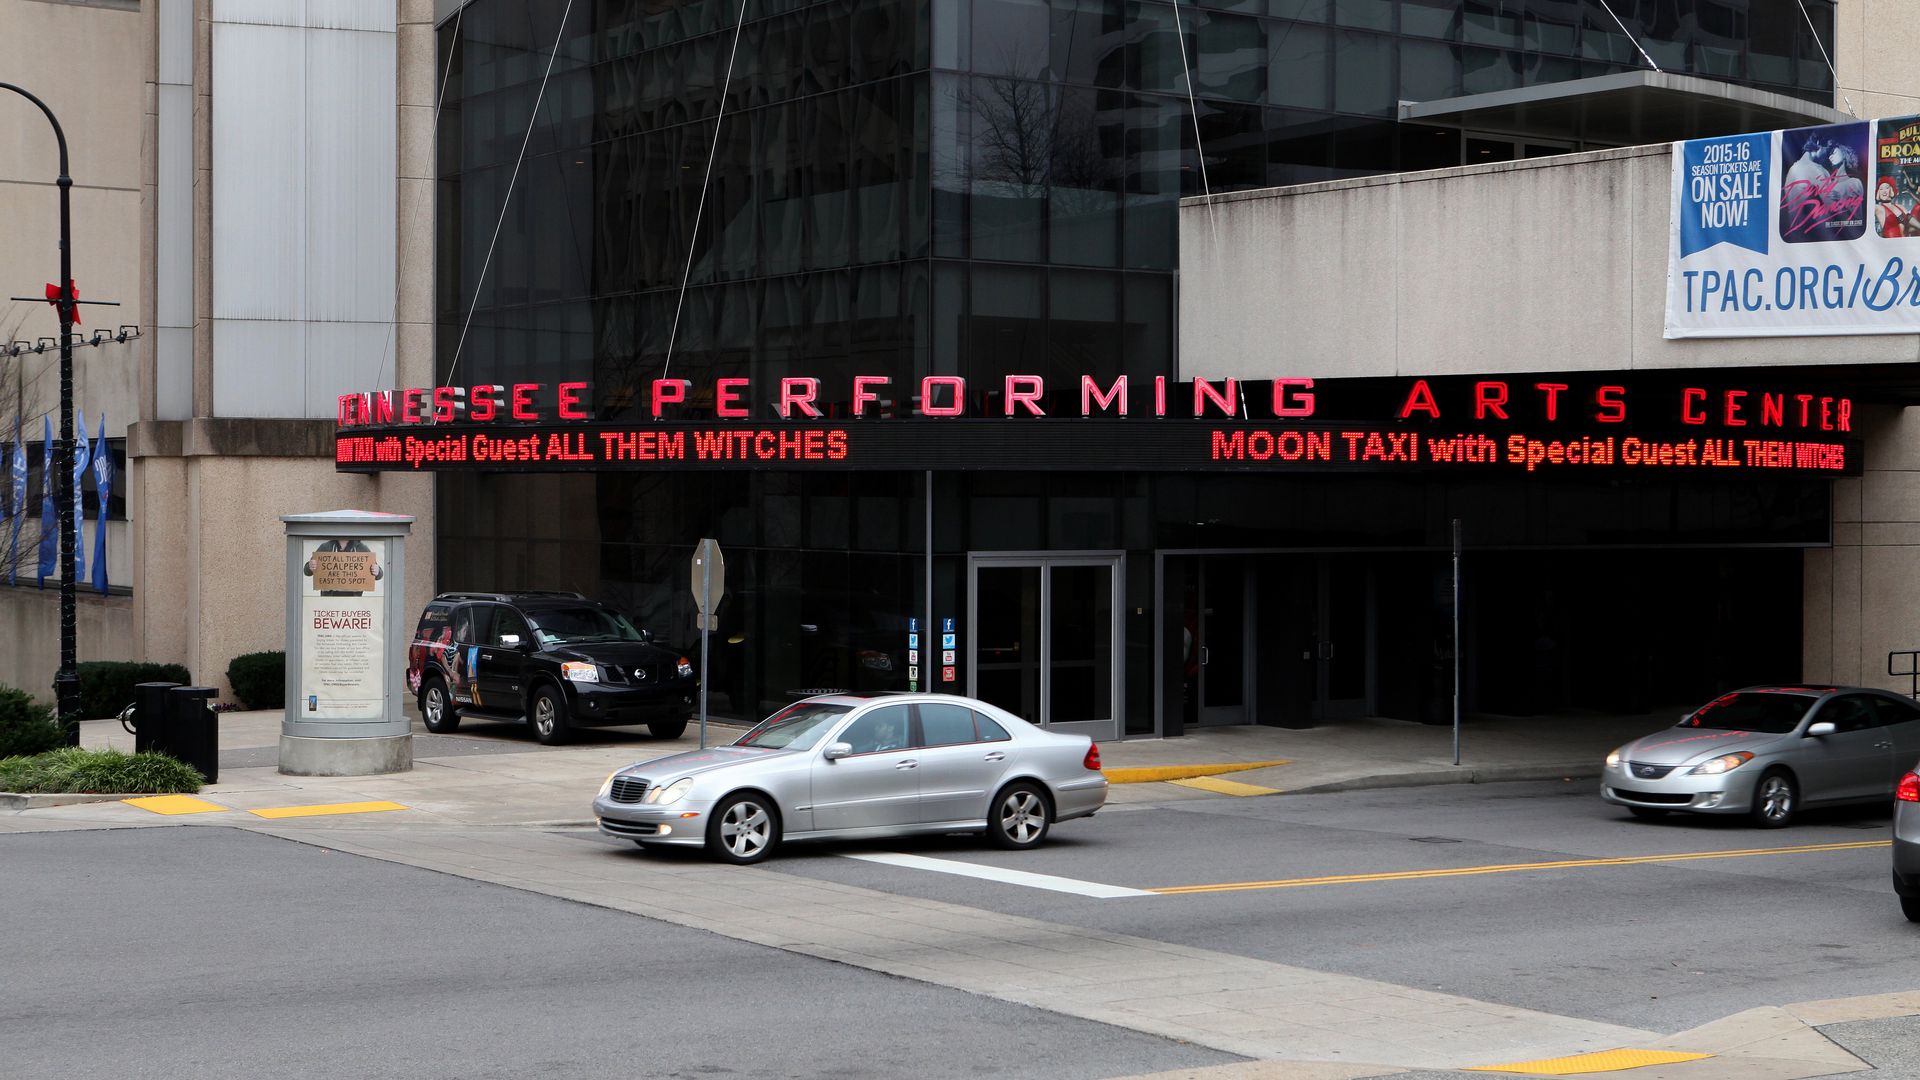 The exterior of the Tennessee Performing Arts Center.